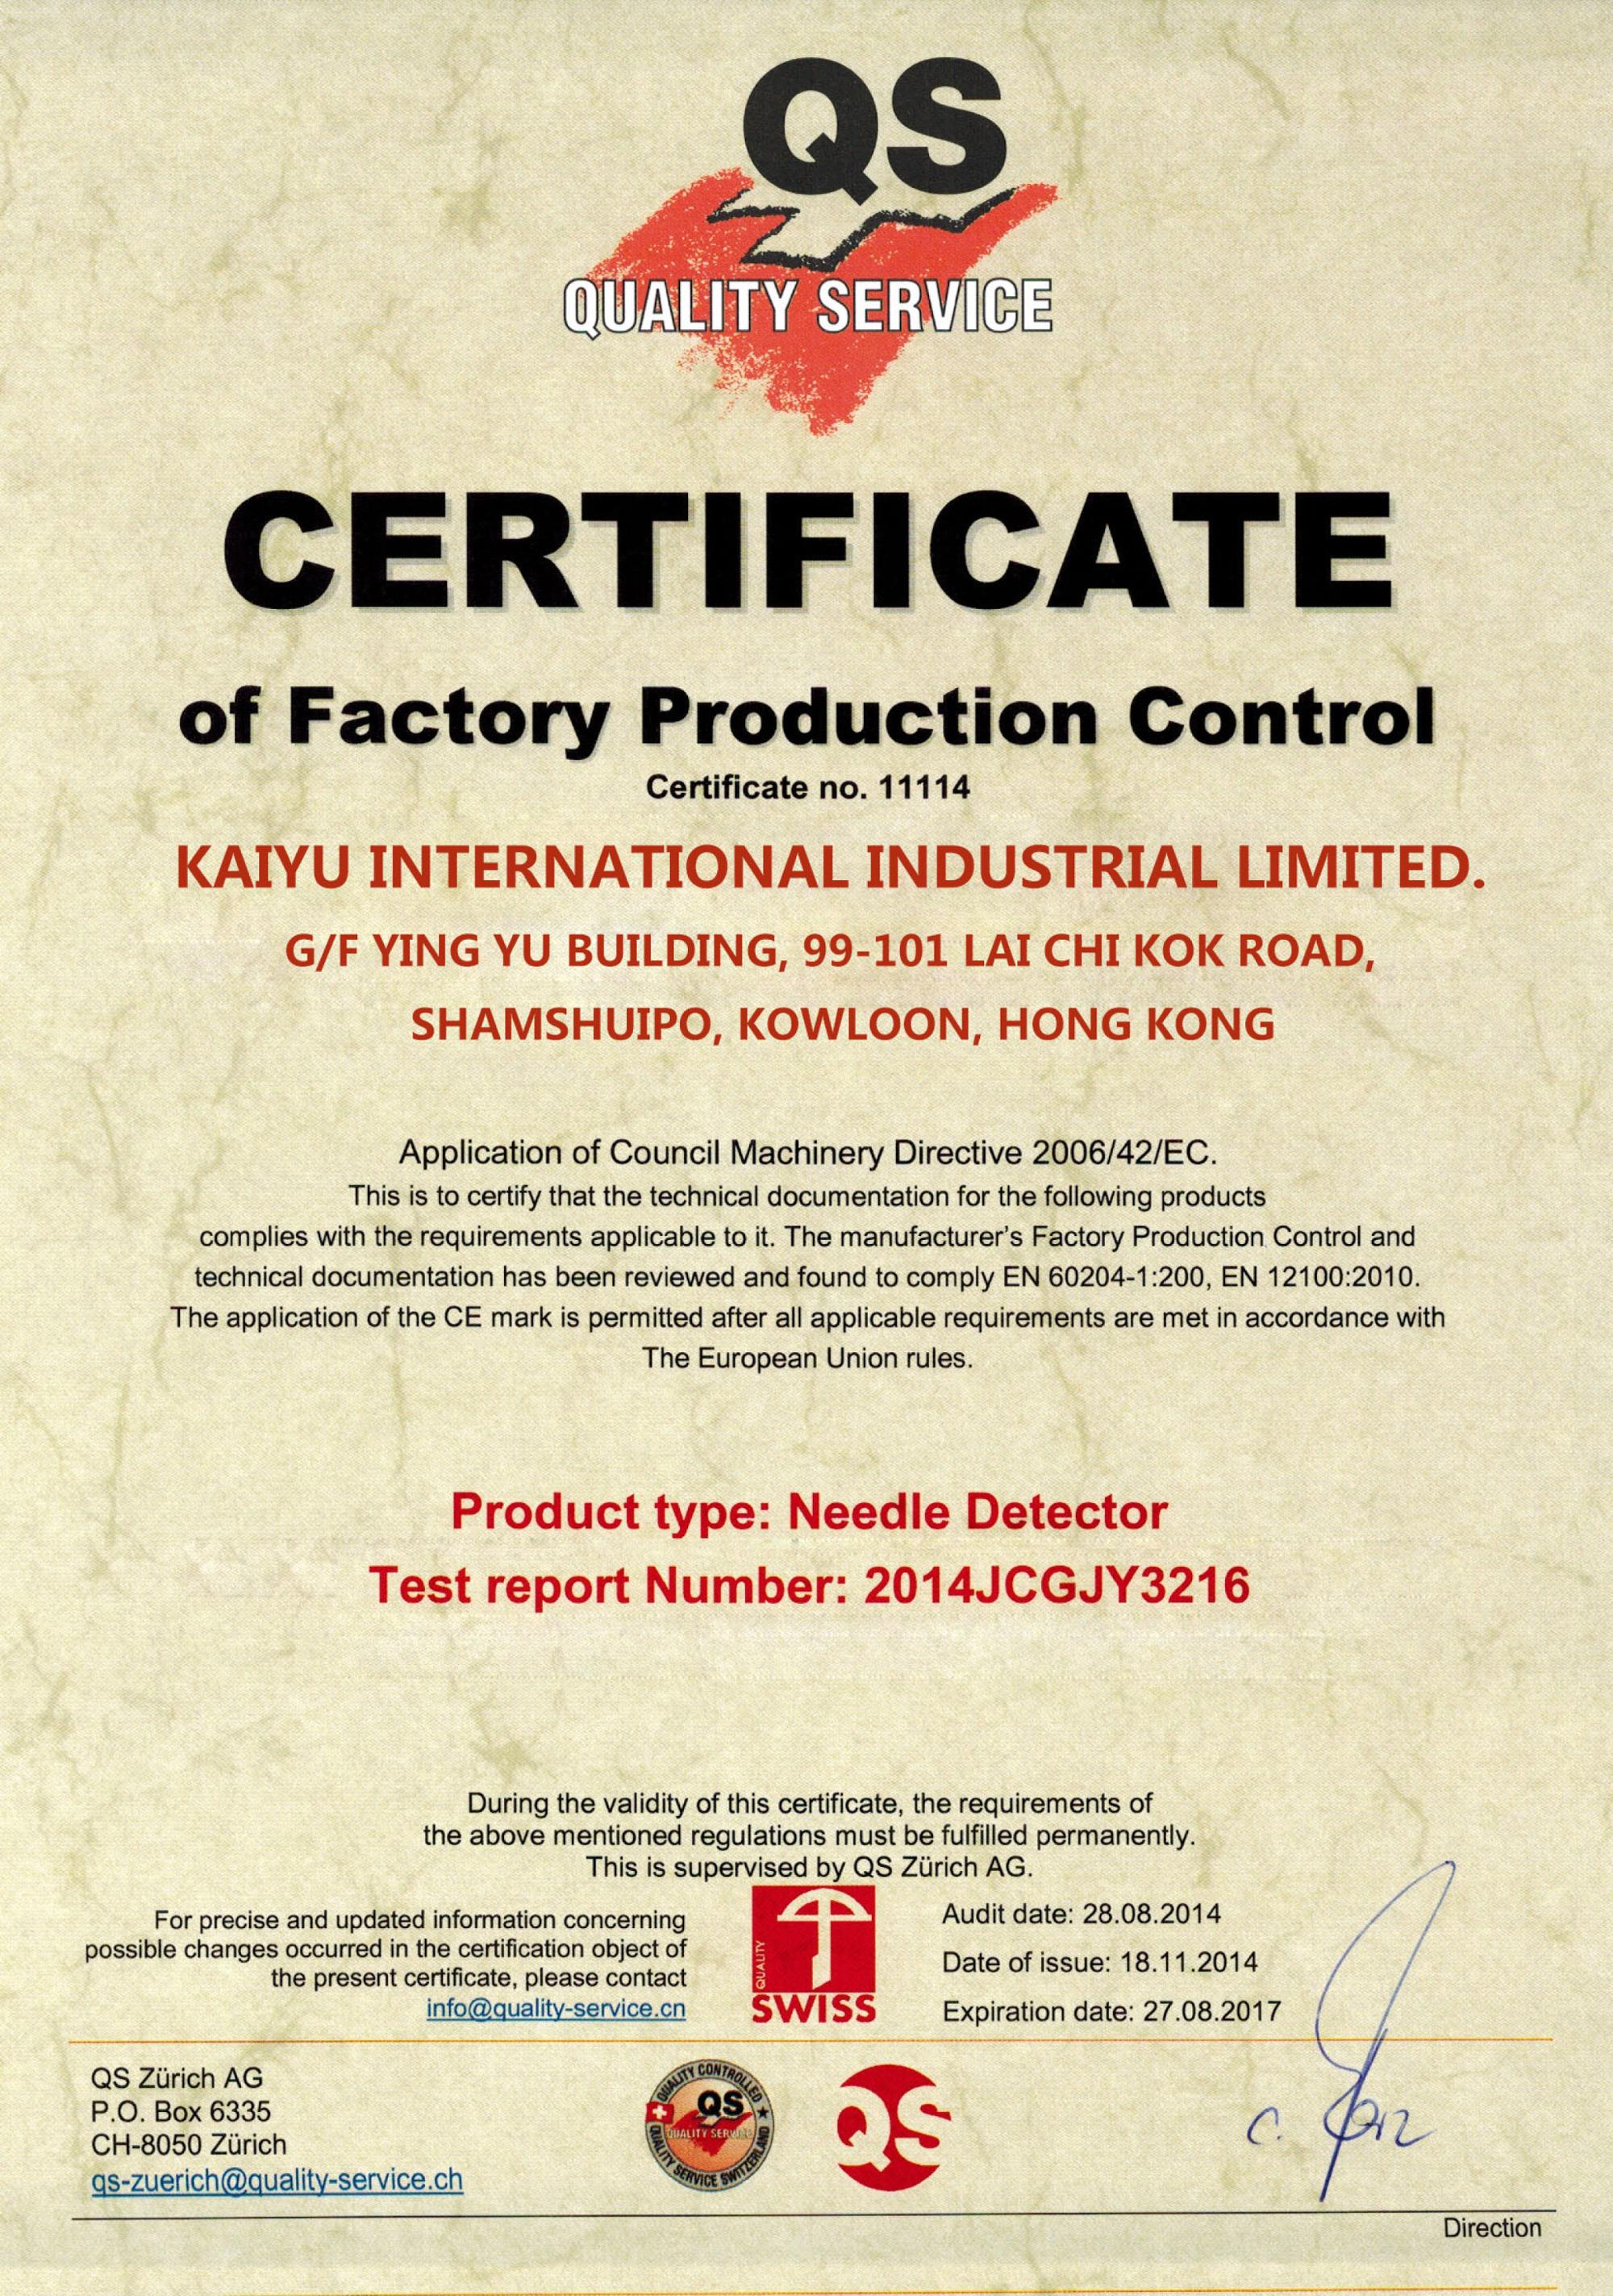 KAI-770N-140 #KAIYU Industrial Needle Detector For Detecting Ferrous Products In Clothing